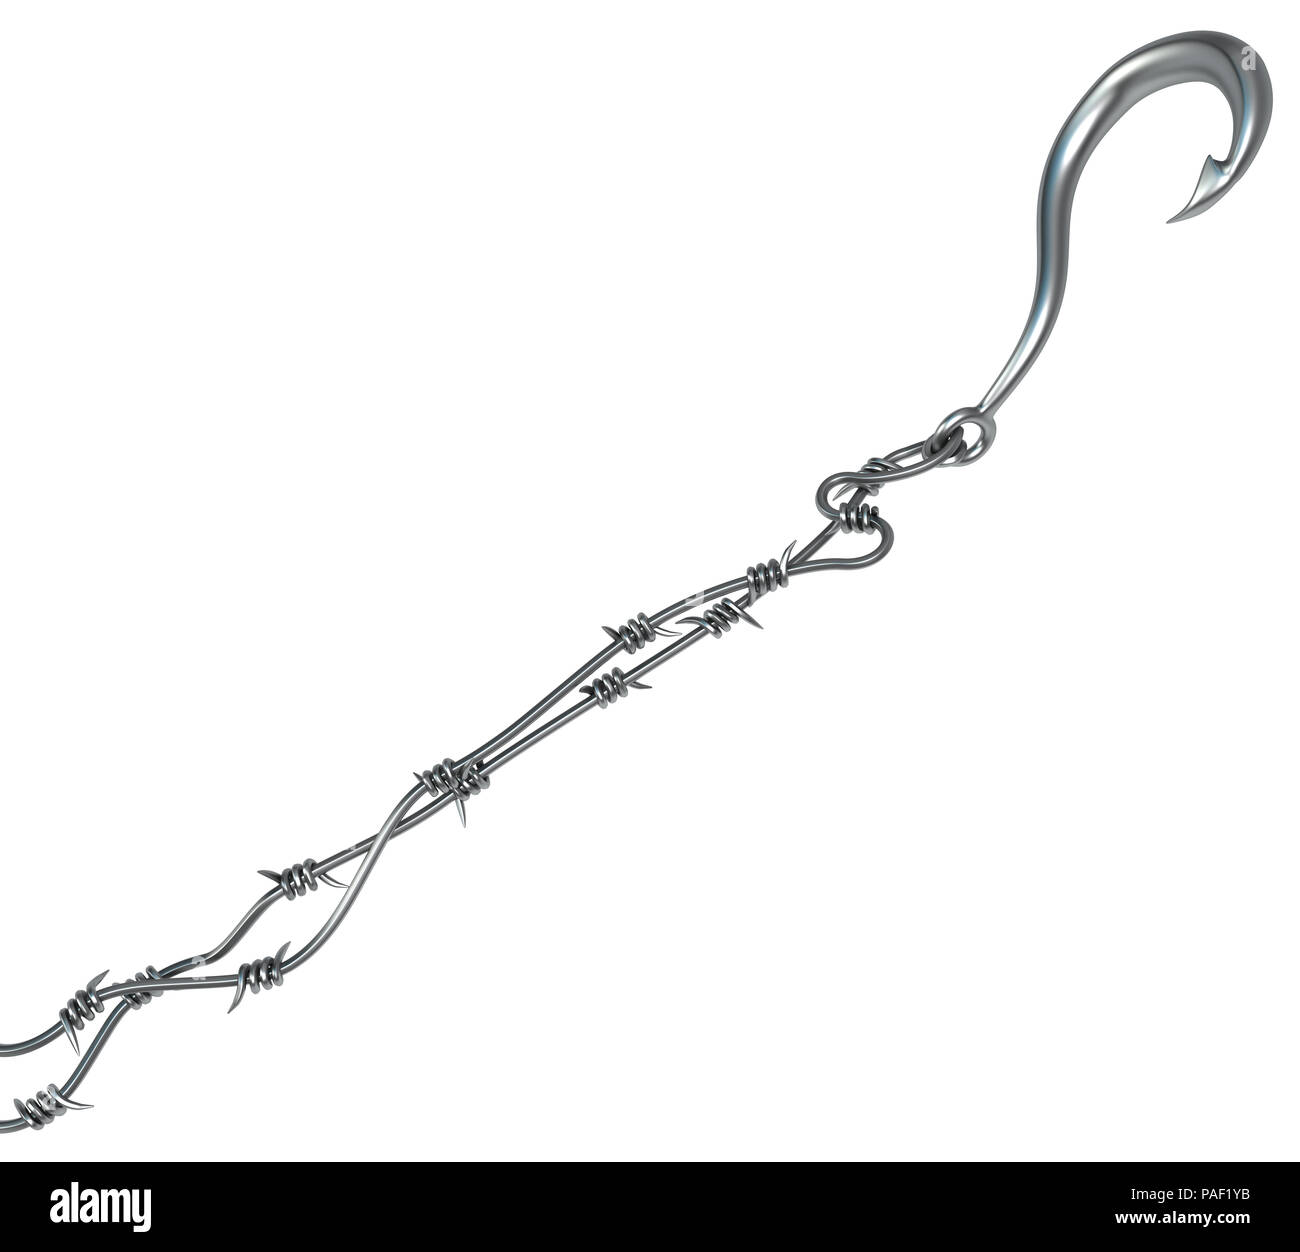 Barbed wire hook, grey metal 3d illustration, isolated, horizontal